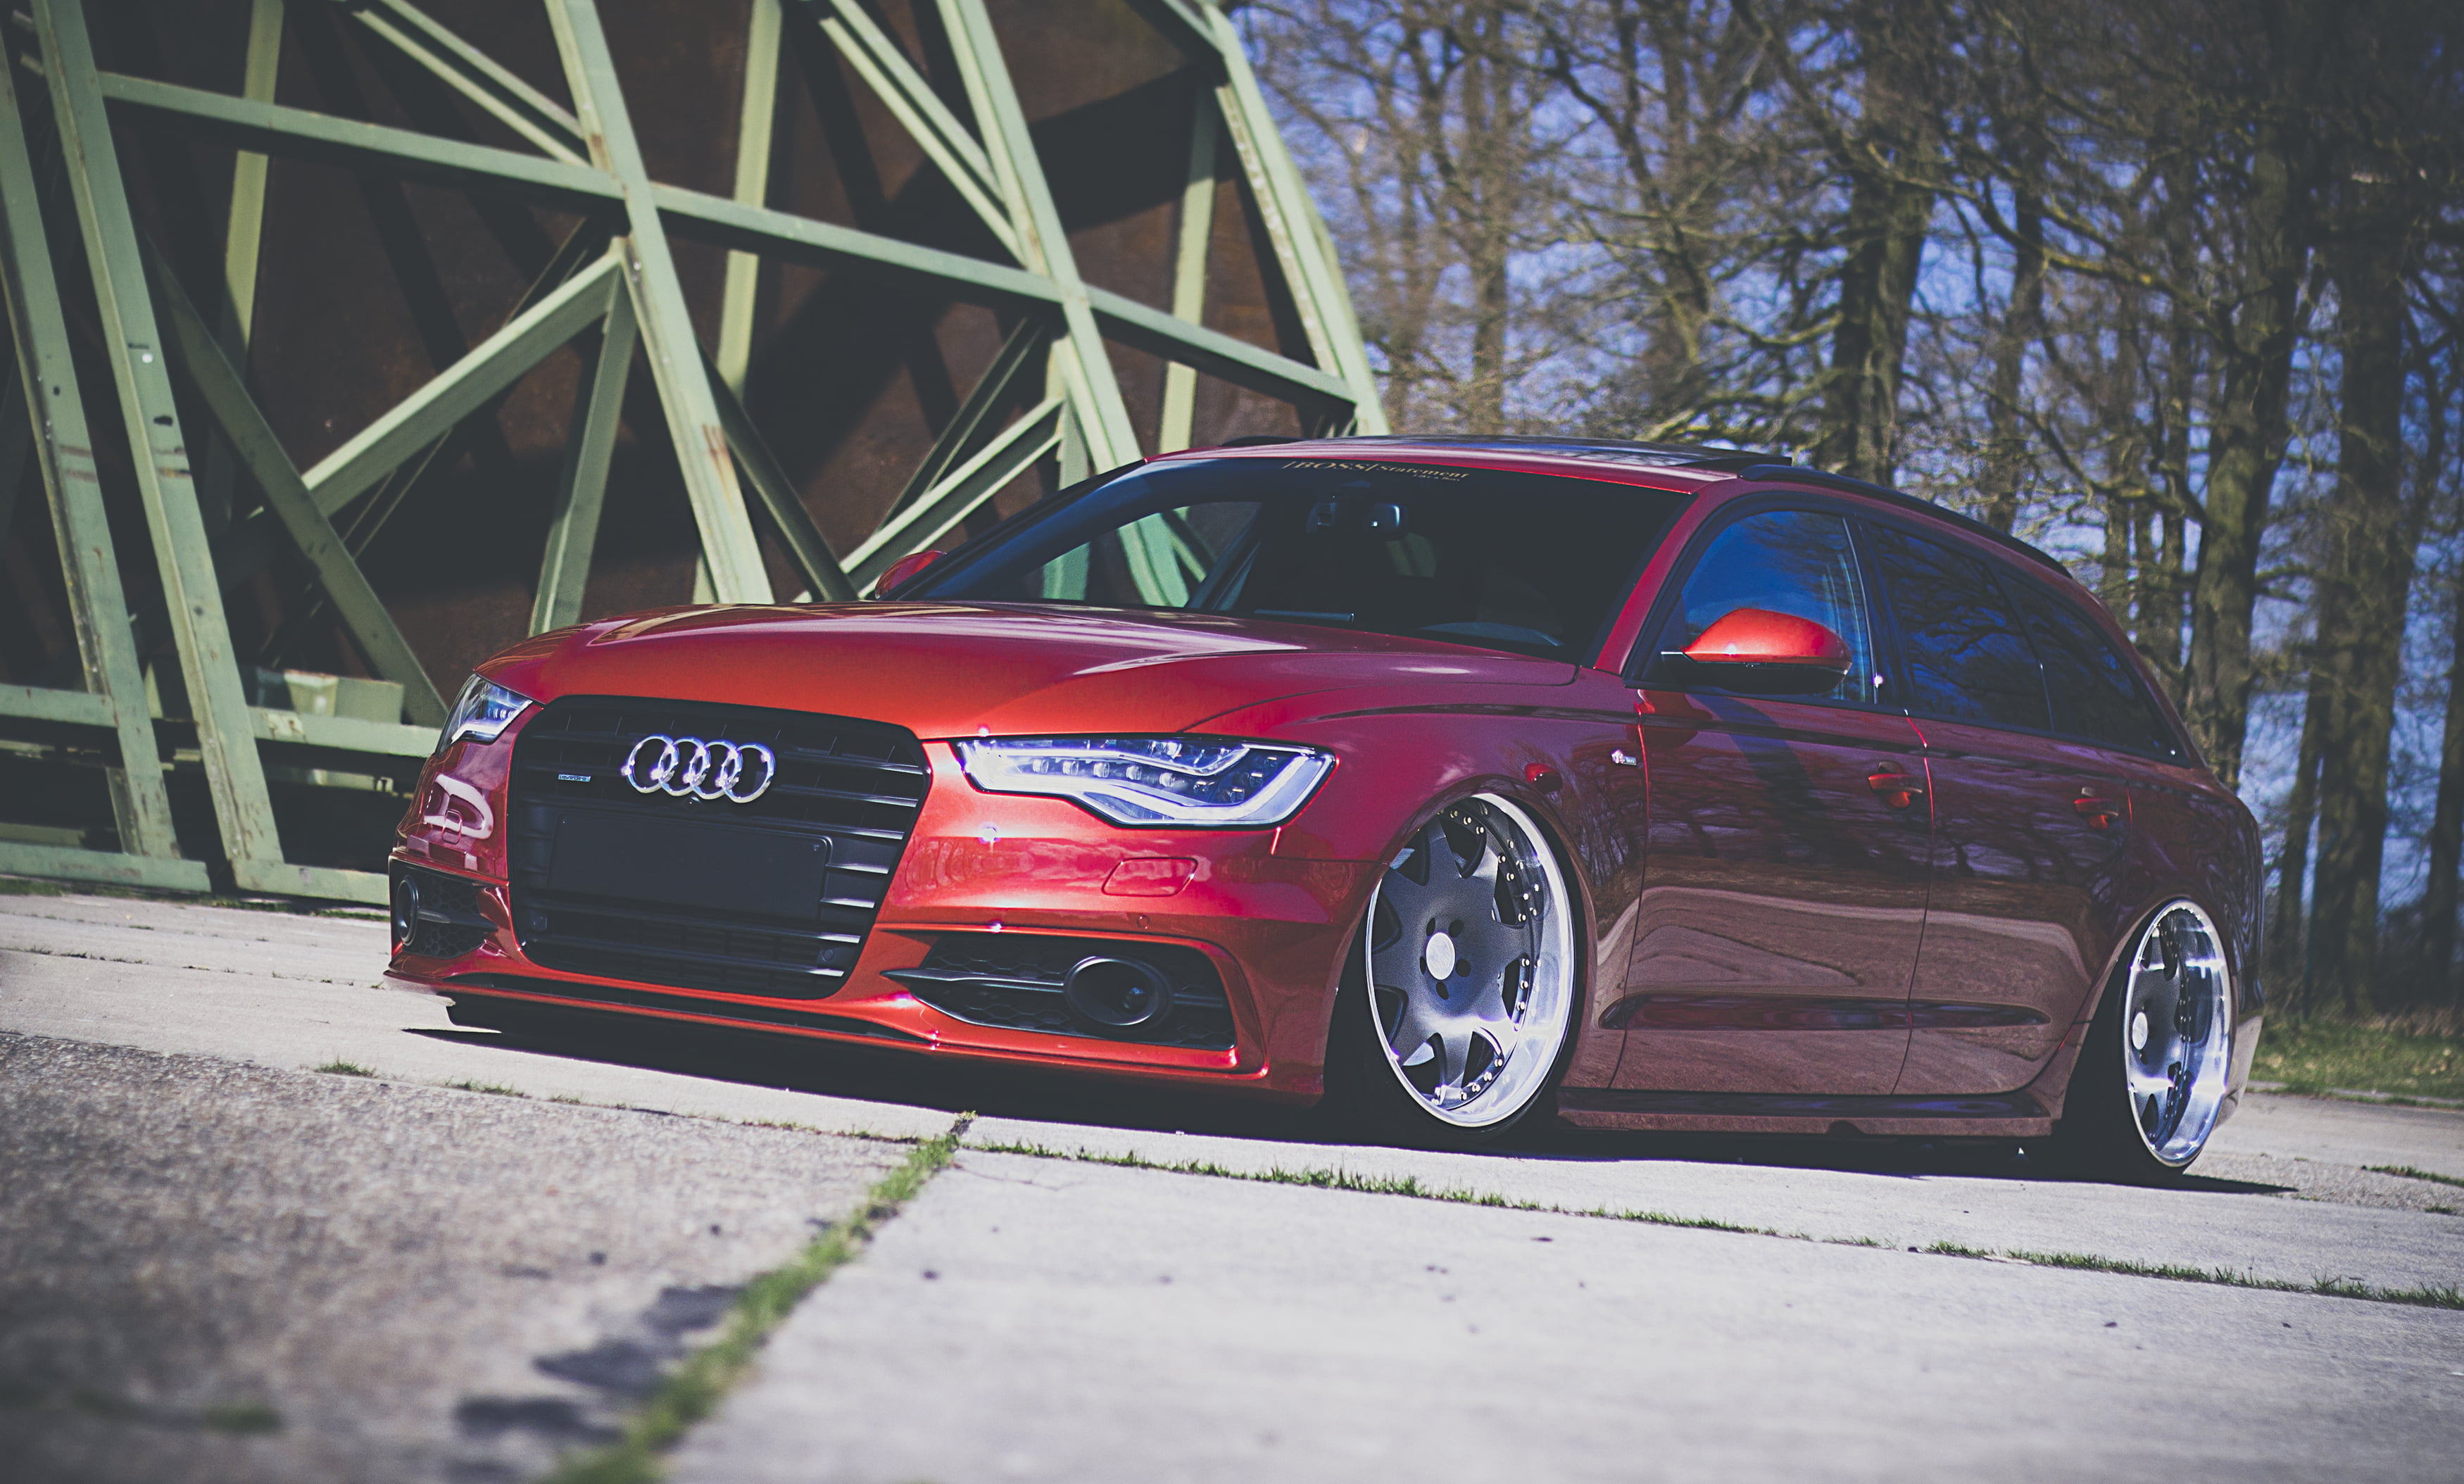 red Audi A-Series, wagon, stance, before, car, land Vehicle, sports Car